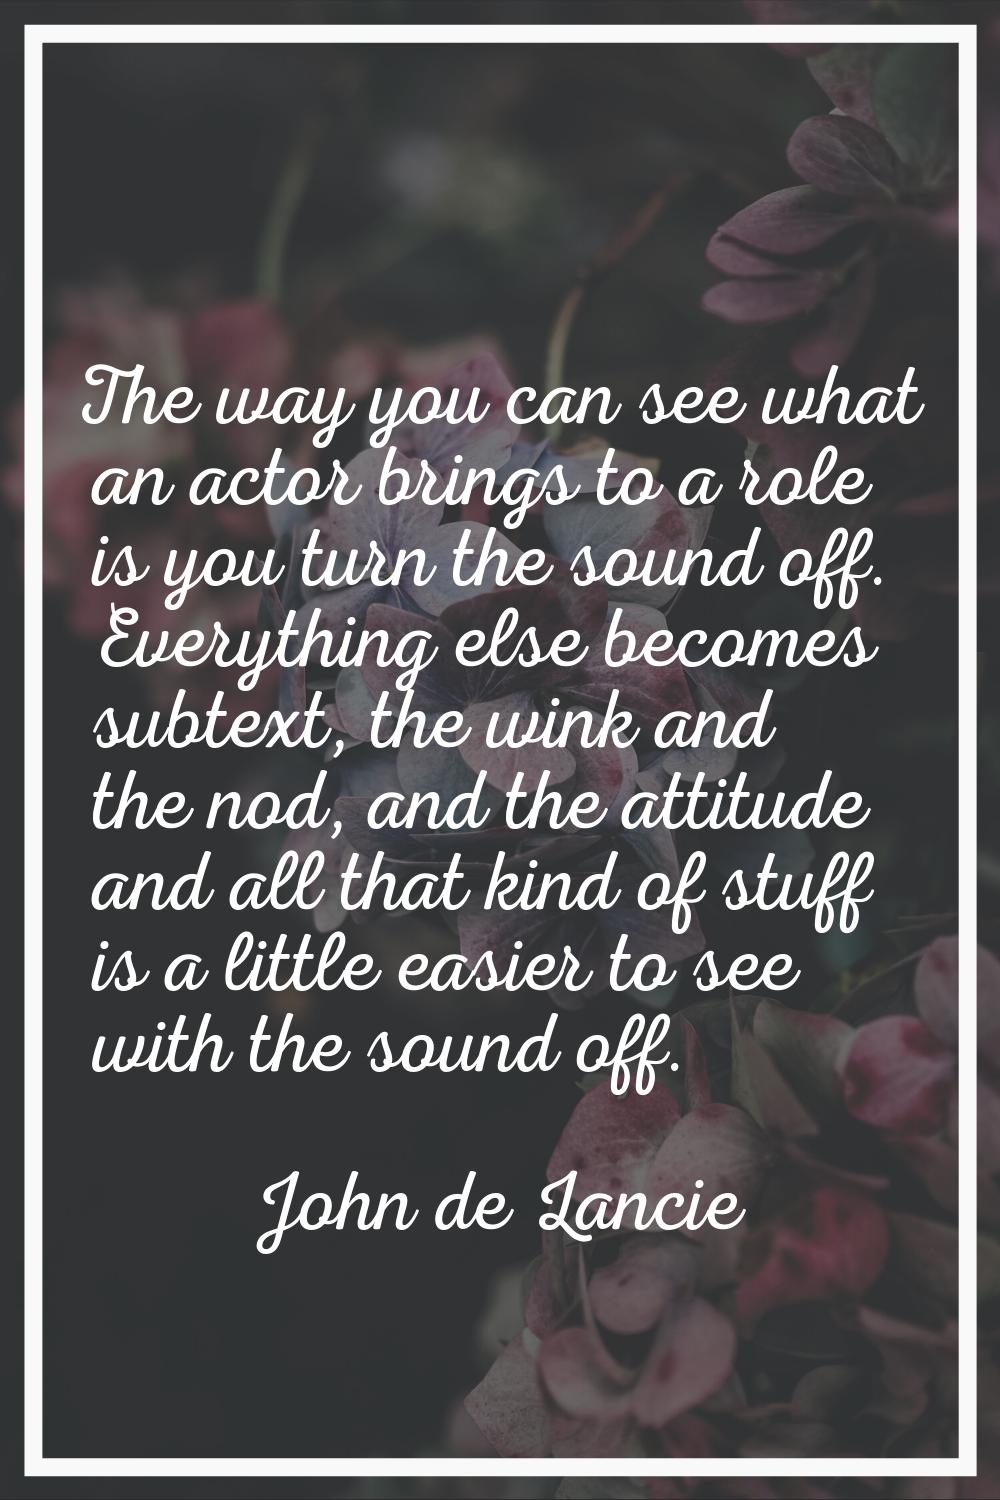 The way you can see what an actor brings to a role is you turn the sound off. Everything else becom